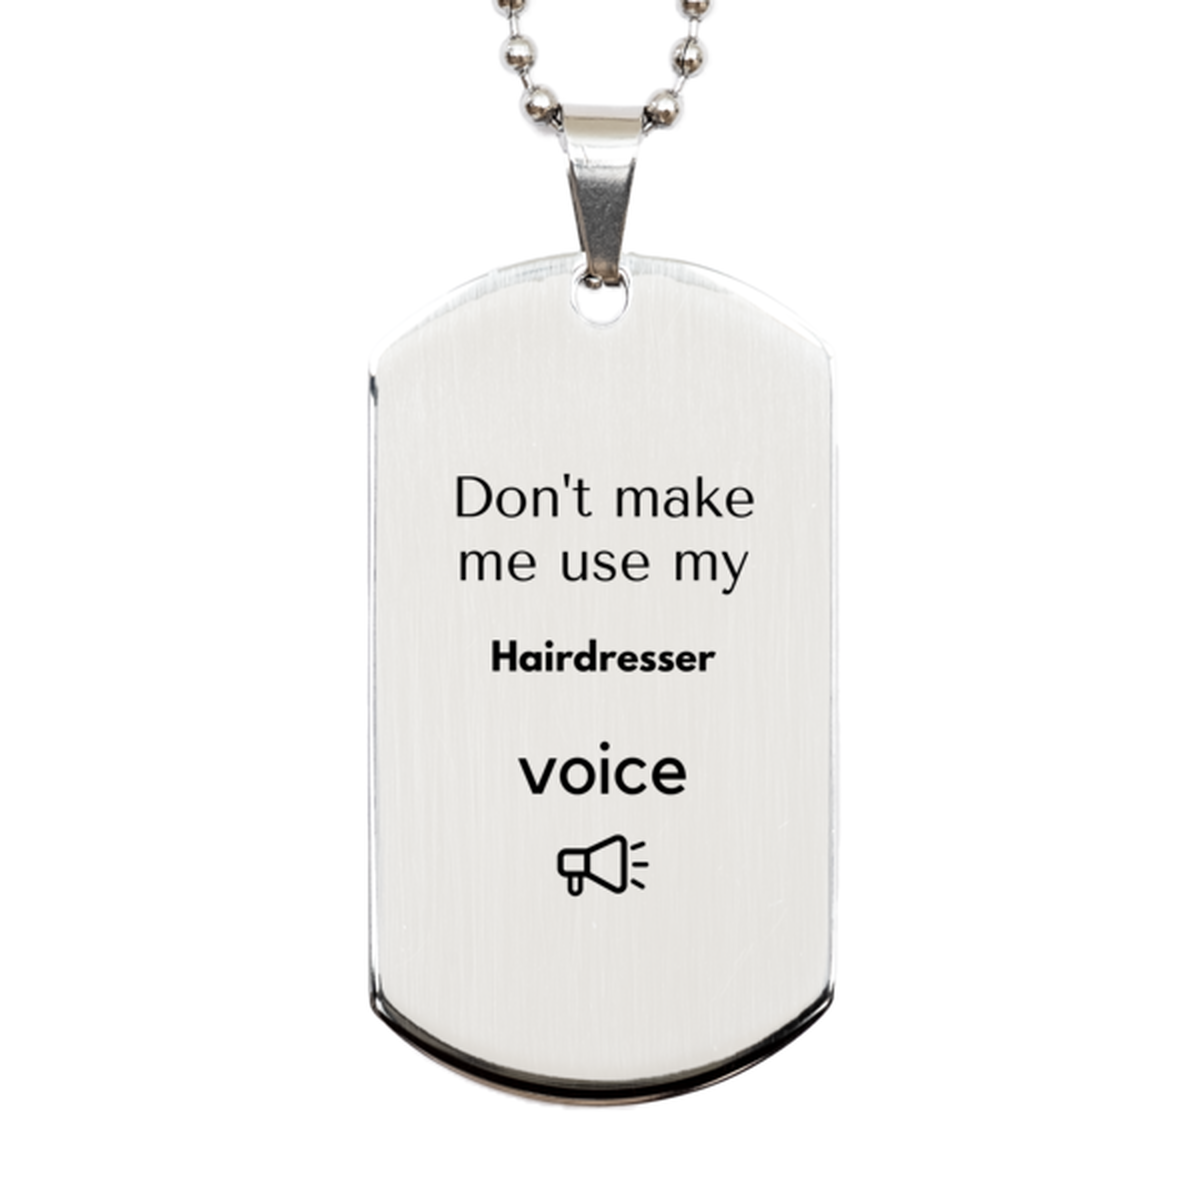 Don't make me use my Hairdresser voice, Sarcasm Hairdresser Gifts, Christmas Hairdresser Silver Dog Tag Birthday Unique Gifts For Hairdresser Coworkers, Men, Women, Colleague, Friends